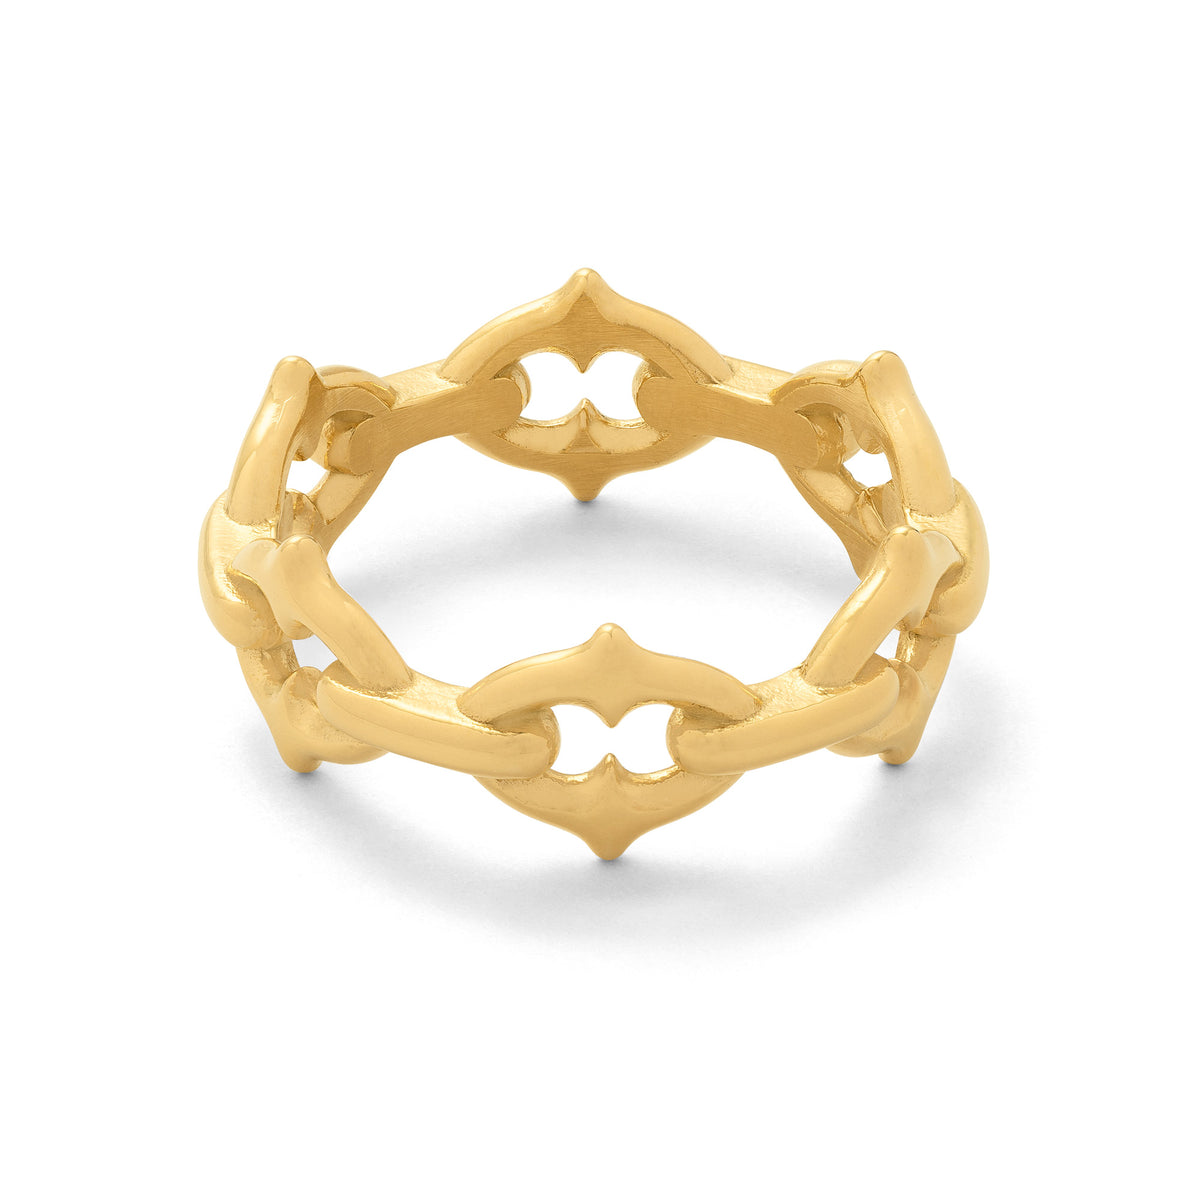 Gothic chain ring with spikes 18k gold